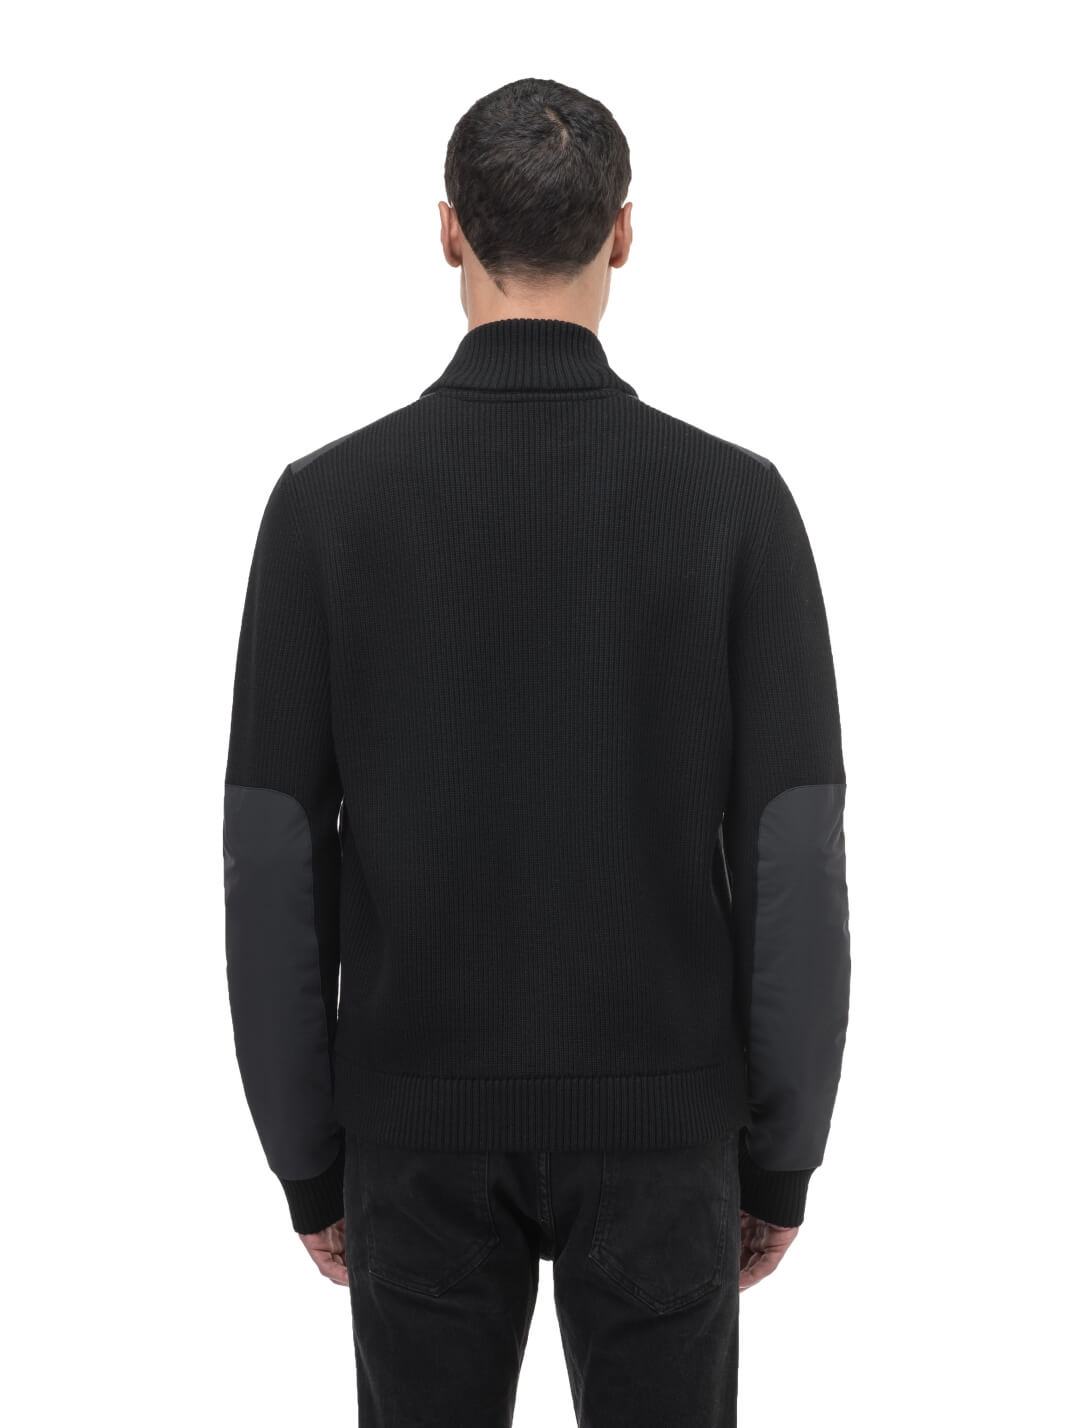 Ero Men's Tailored Hybrid Sweater in hip length, PrimaLoft Gold Insulation Active+, Durable 4-Way Stretch Weave quilted torso, Merino wool knit collar, sleeves, back, and cuffs, two-way front zipper, and hidden waist pockets, in Black